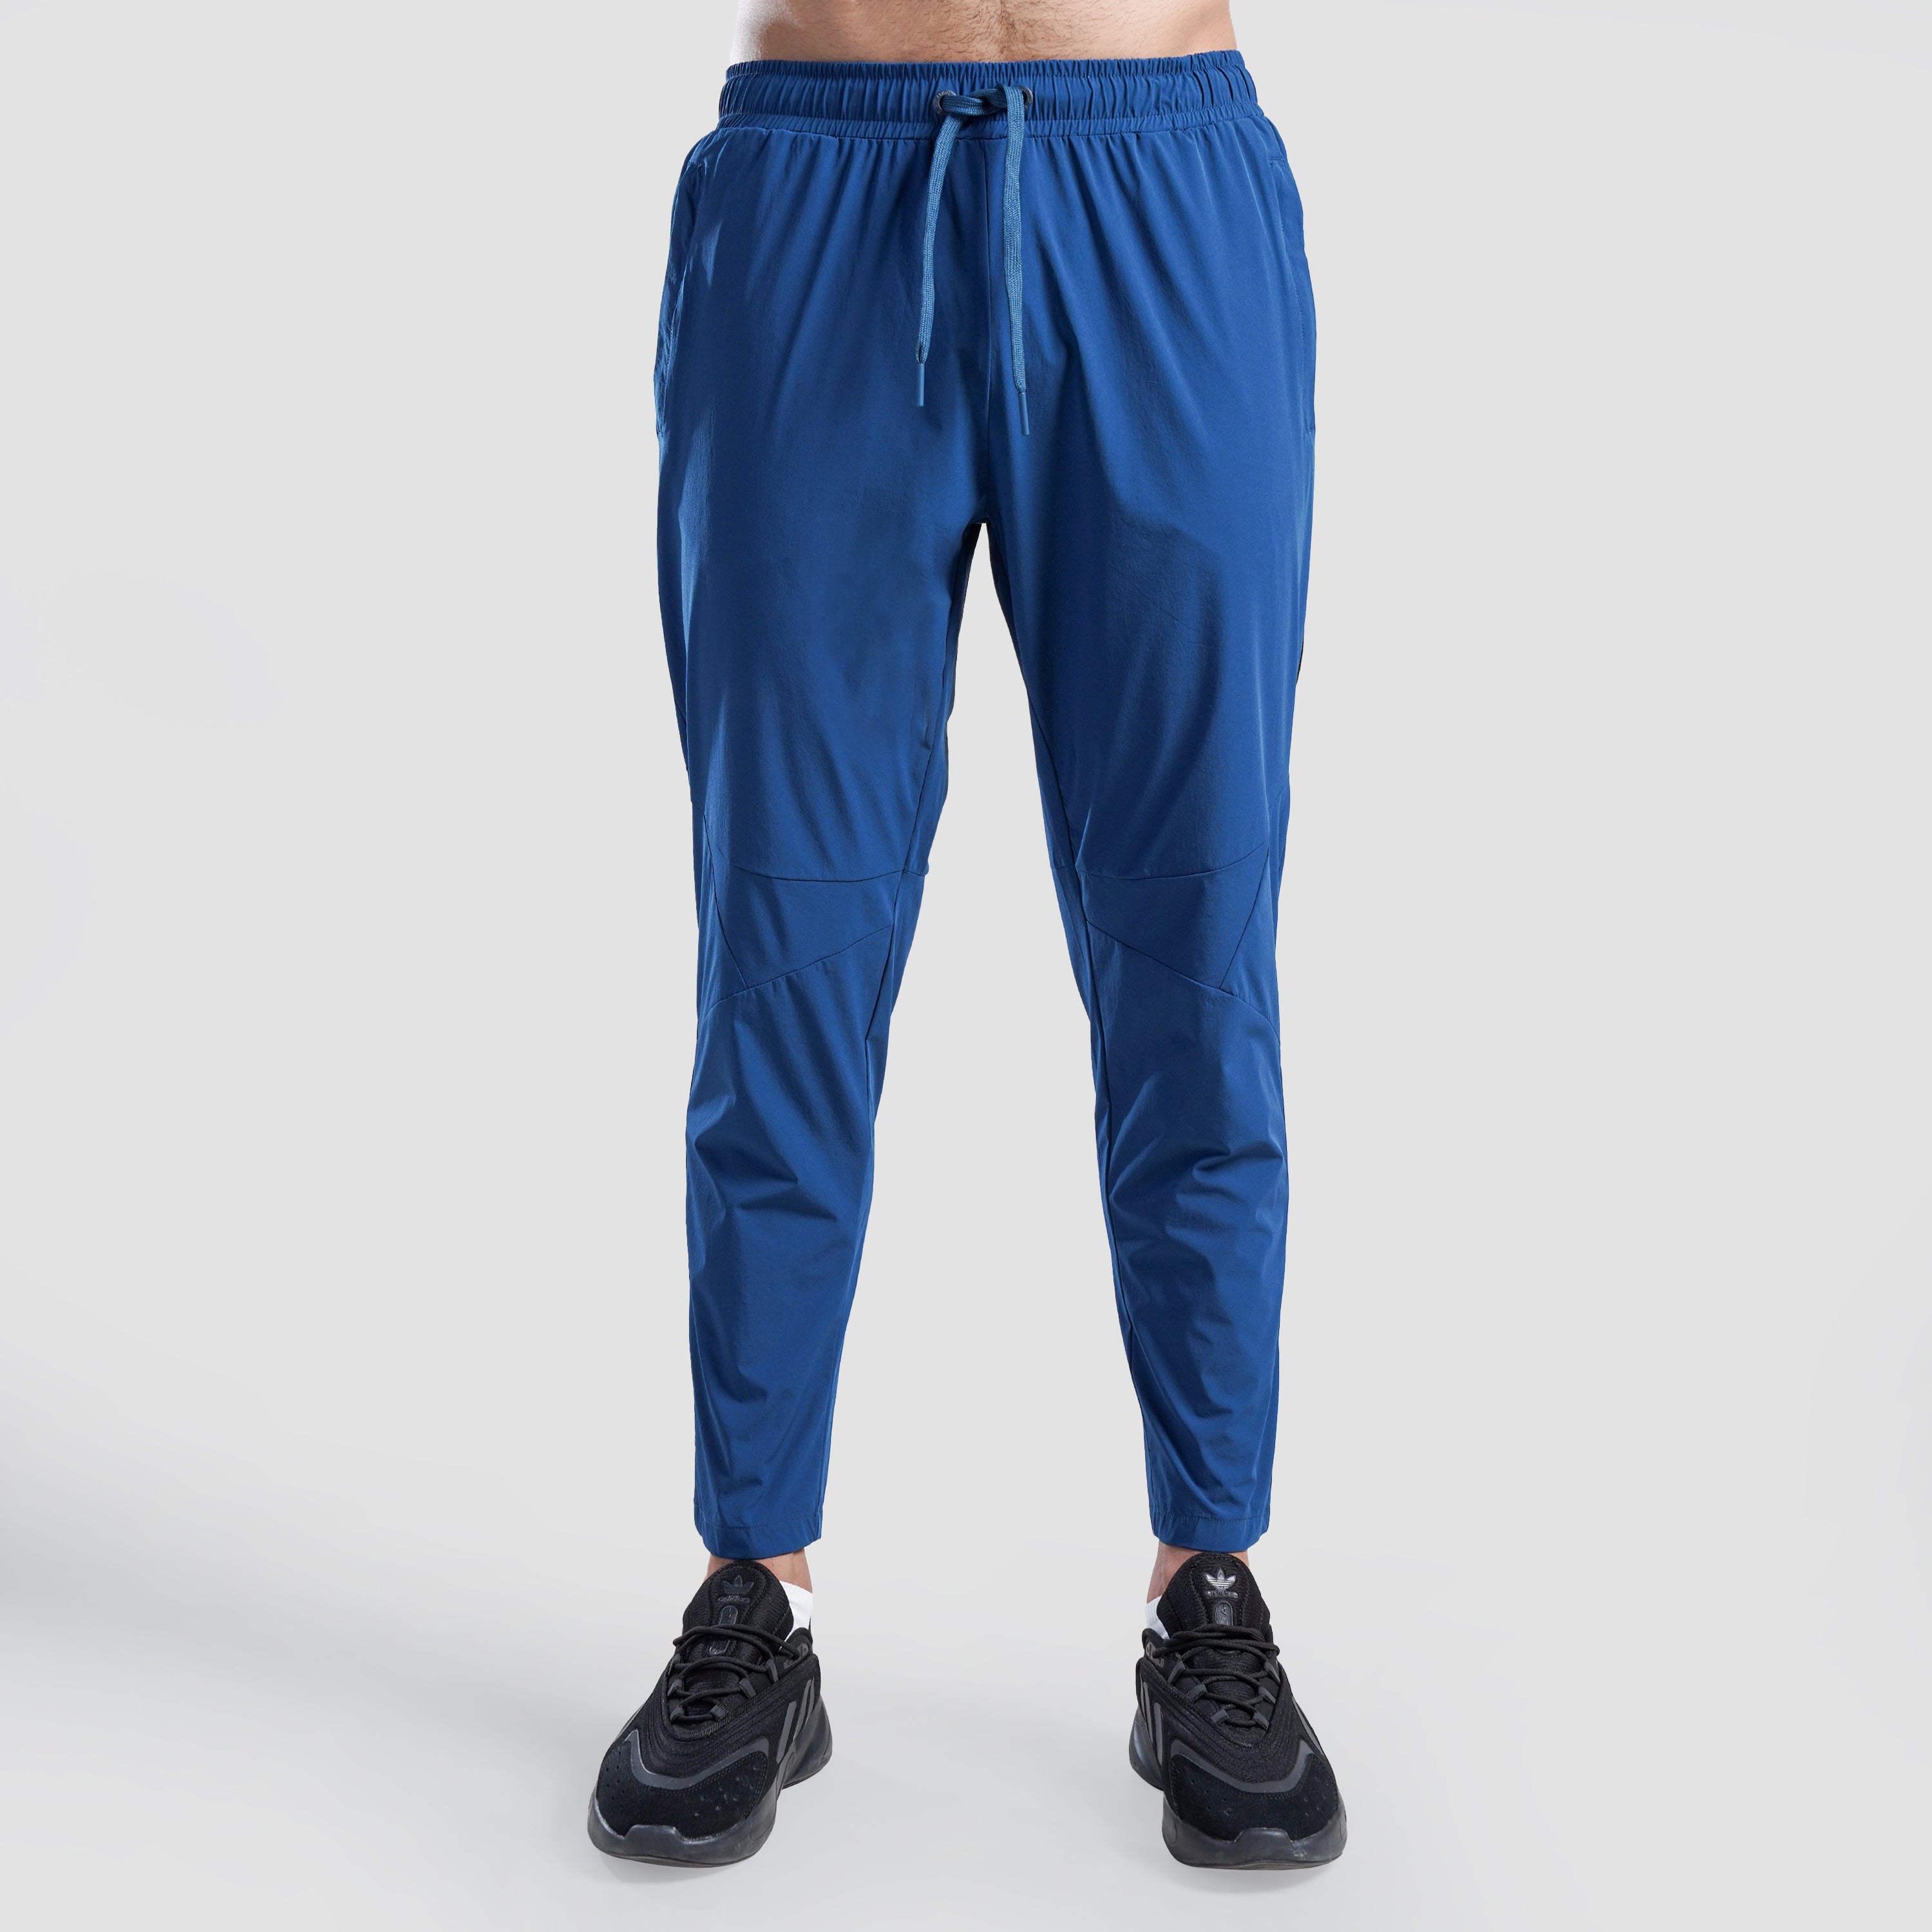 Performance Trousers (Teal)